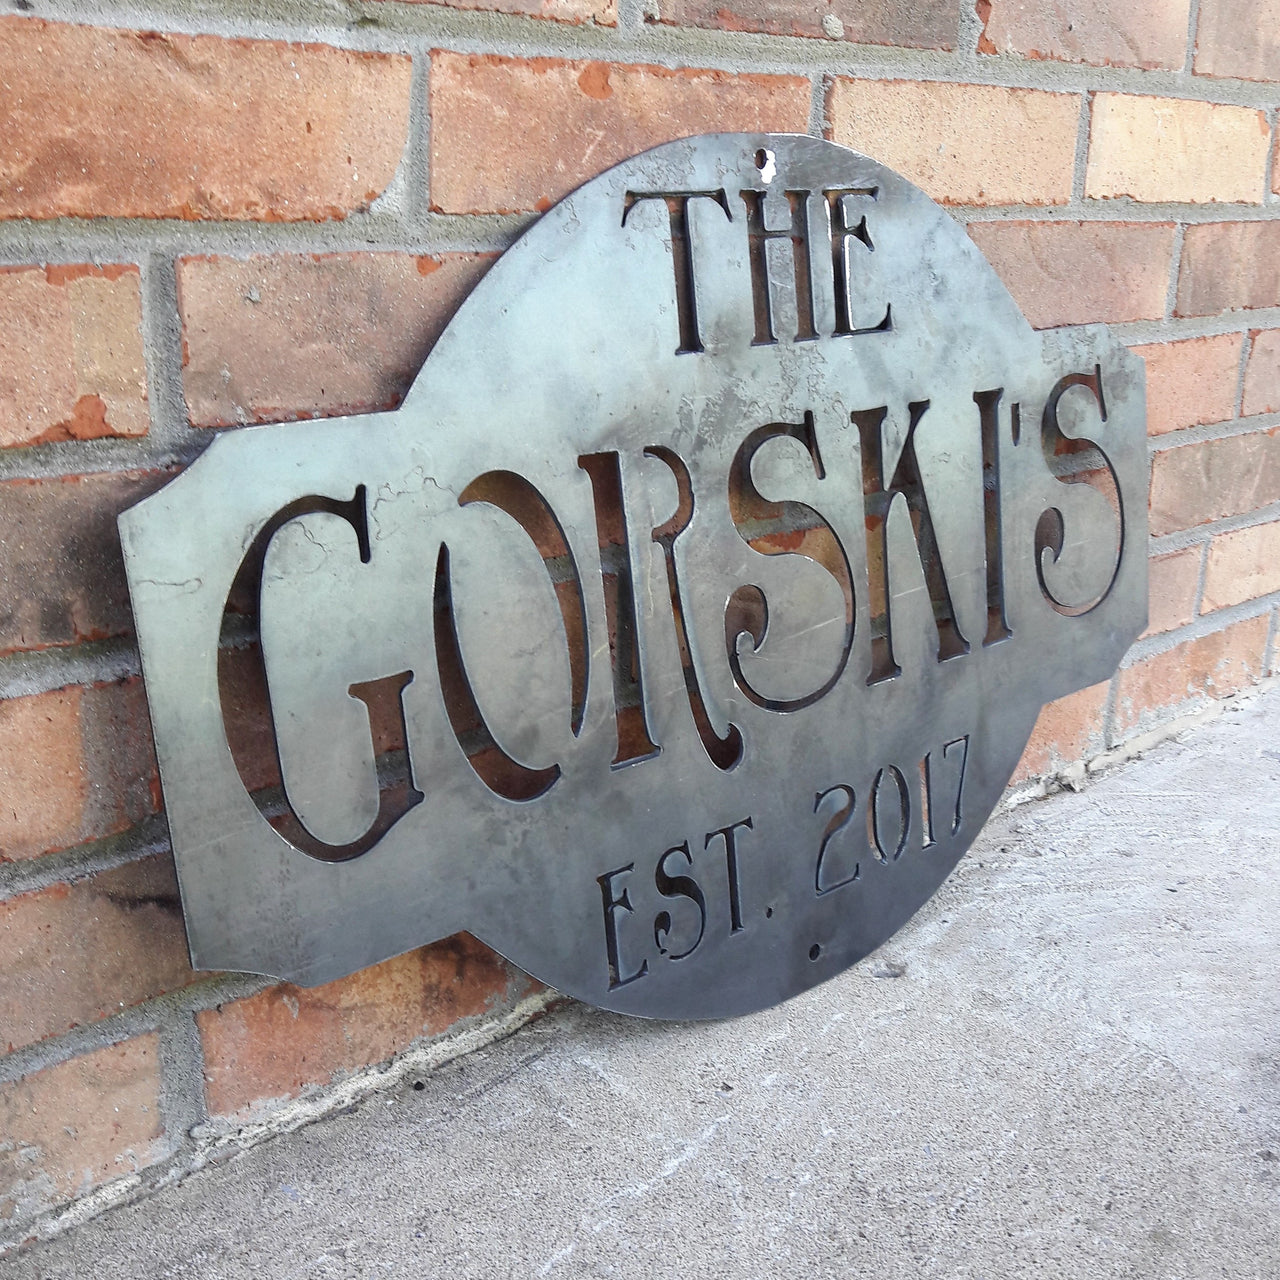 Rustic  raw steel metal sign. The sign reads, " The Gorski's est. 2017"